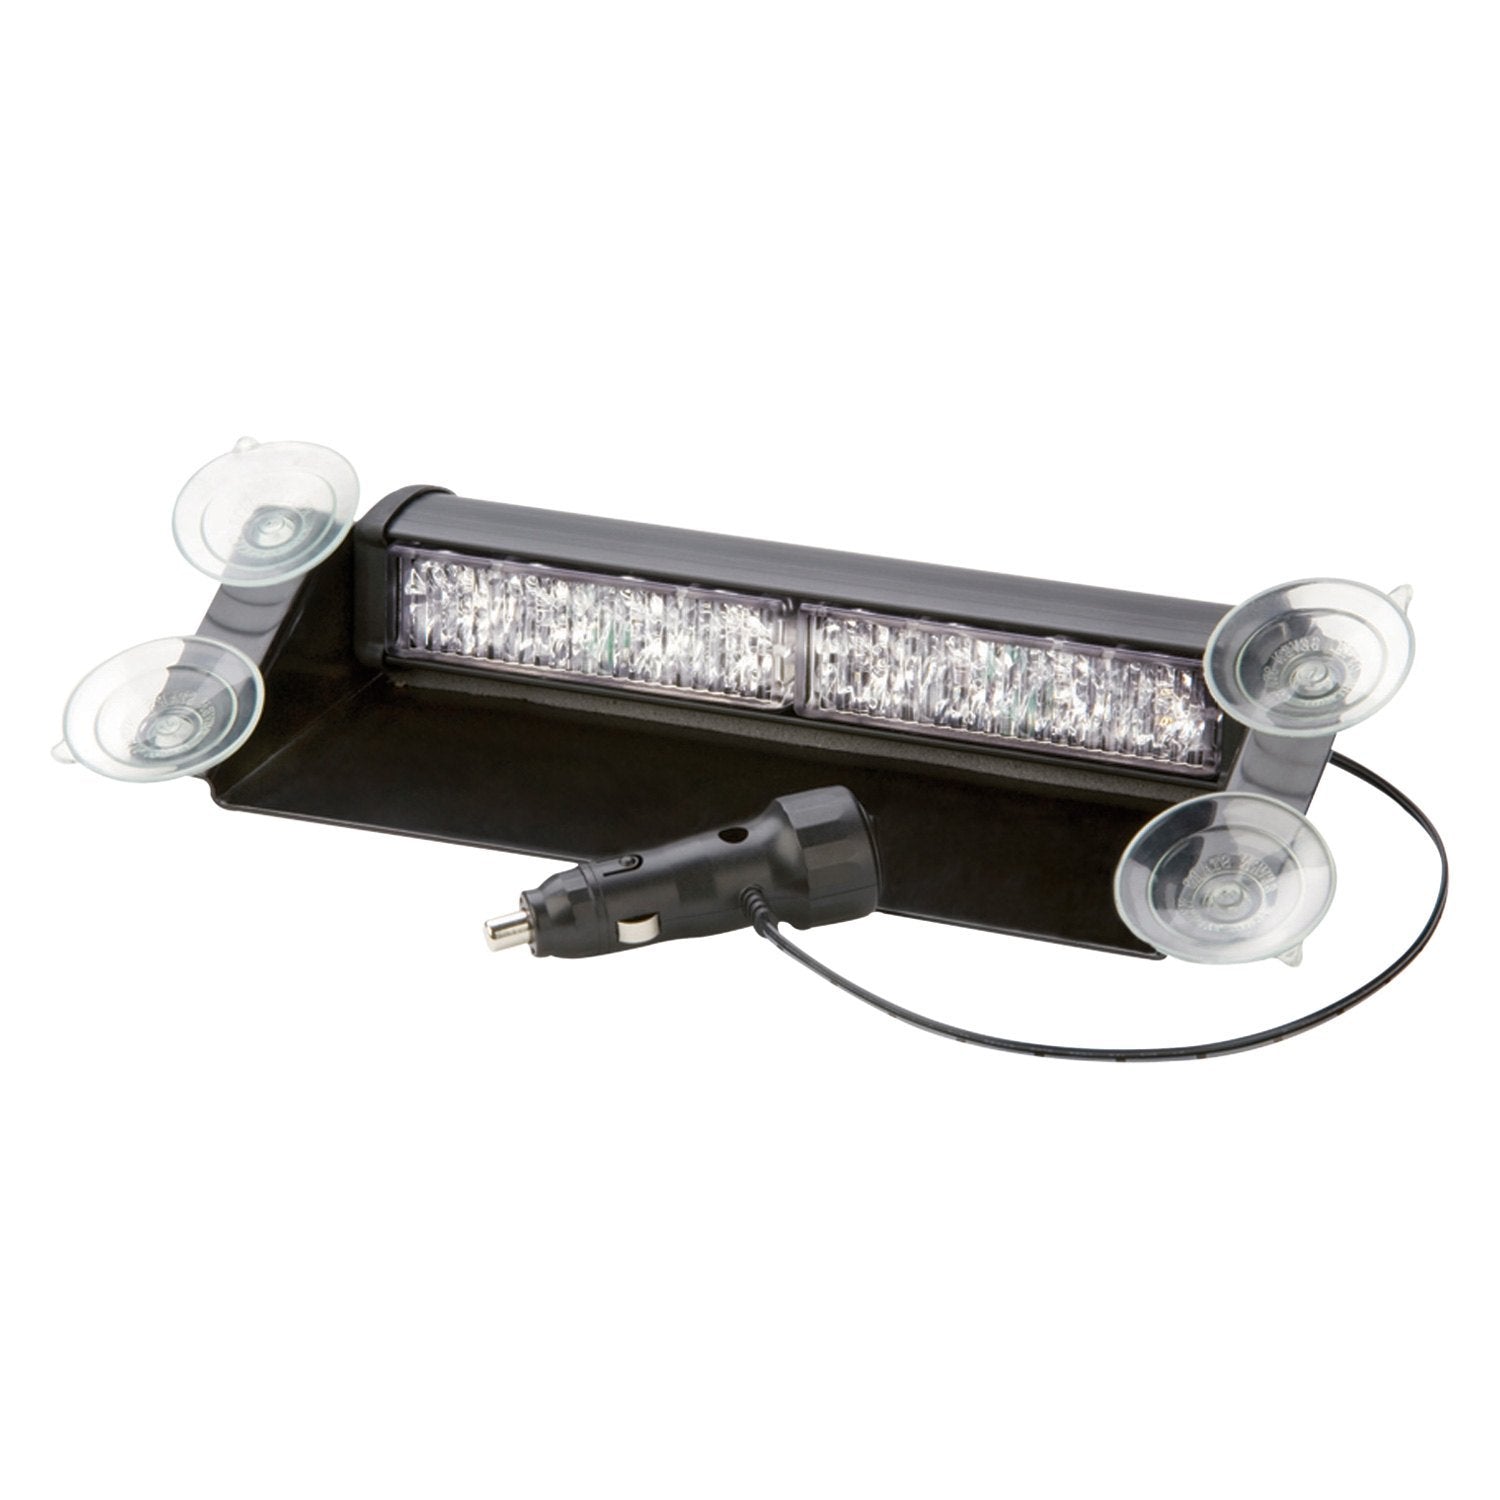 ECO 3612RR ECCO Directional 14 LED Dash Light (Switched, Red/Red, Suction or 2 Bolt)